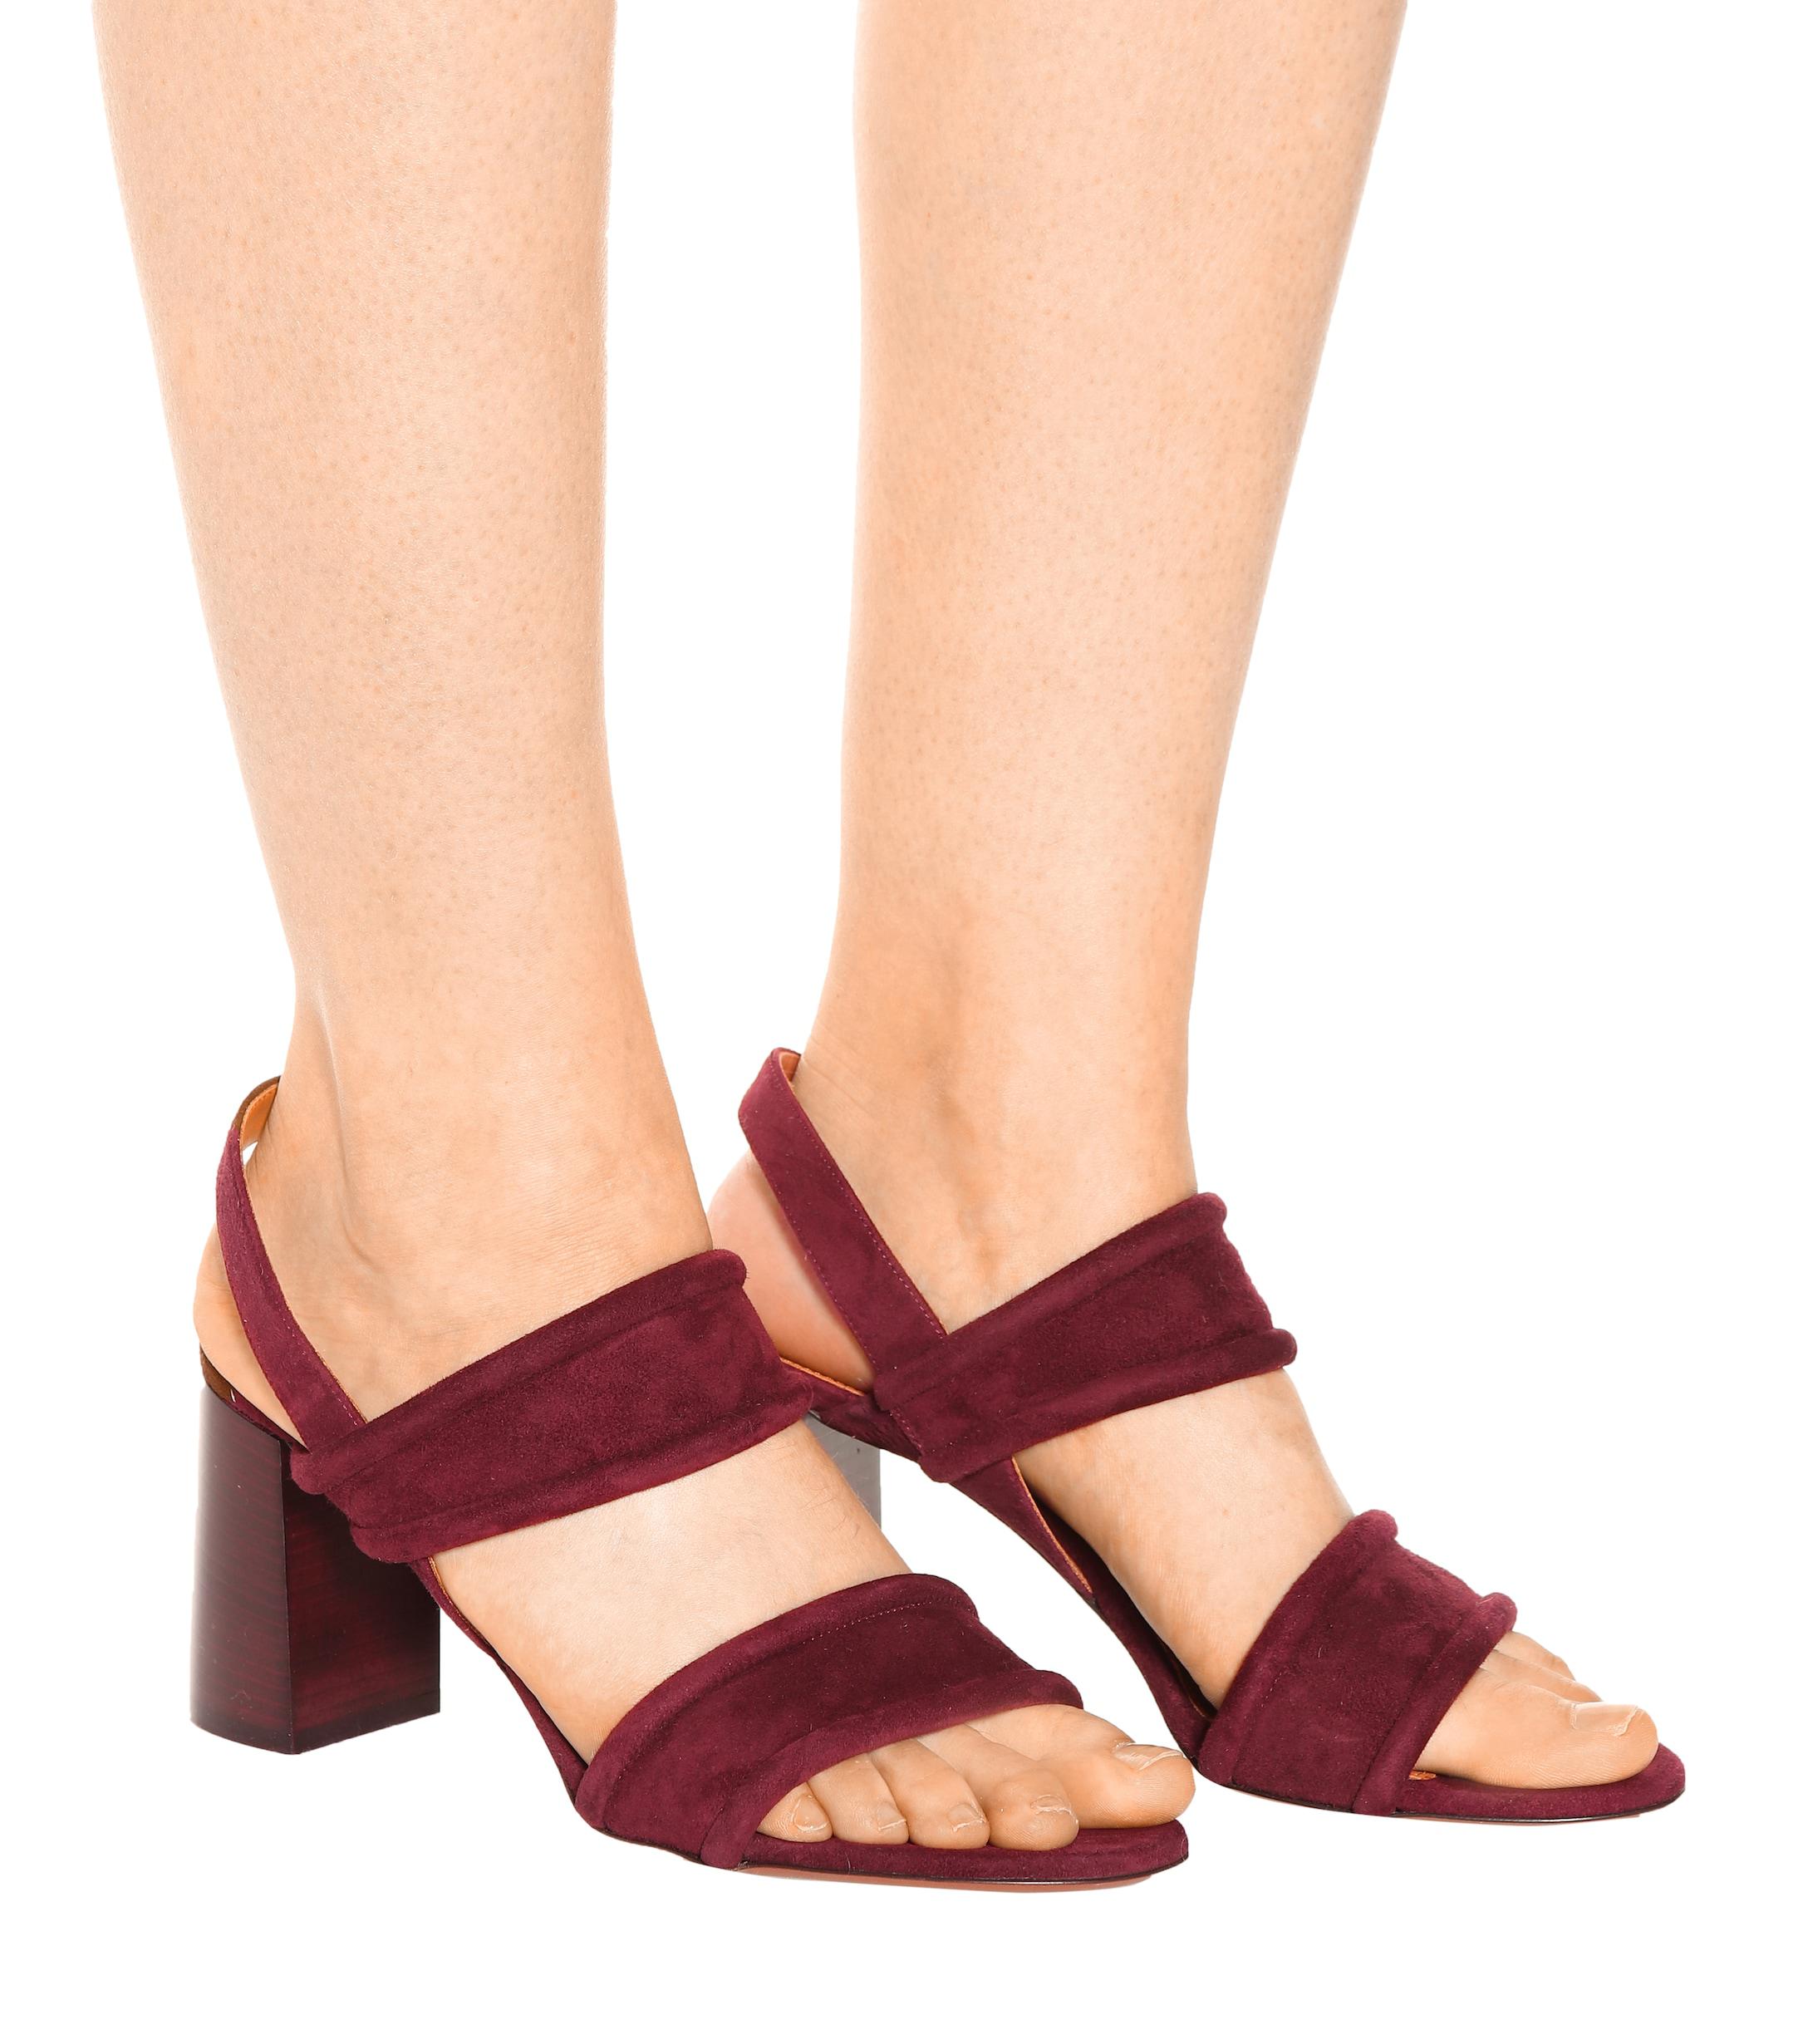 Chloé Suede Sandals in Red - Lyst